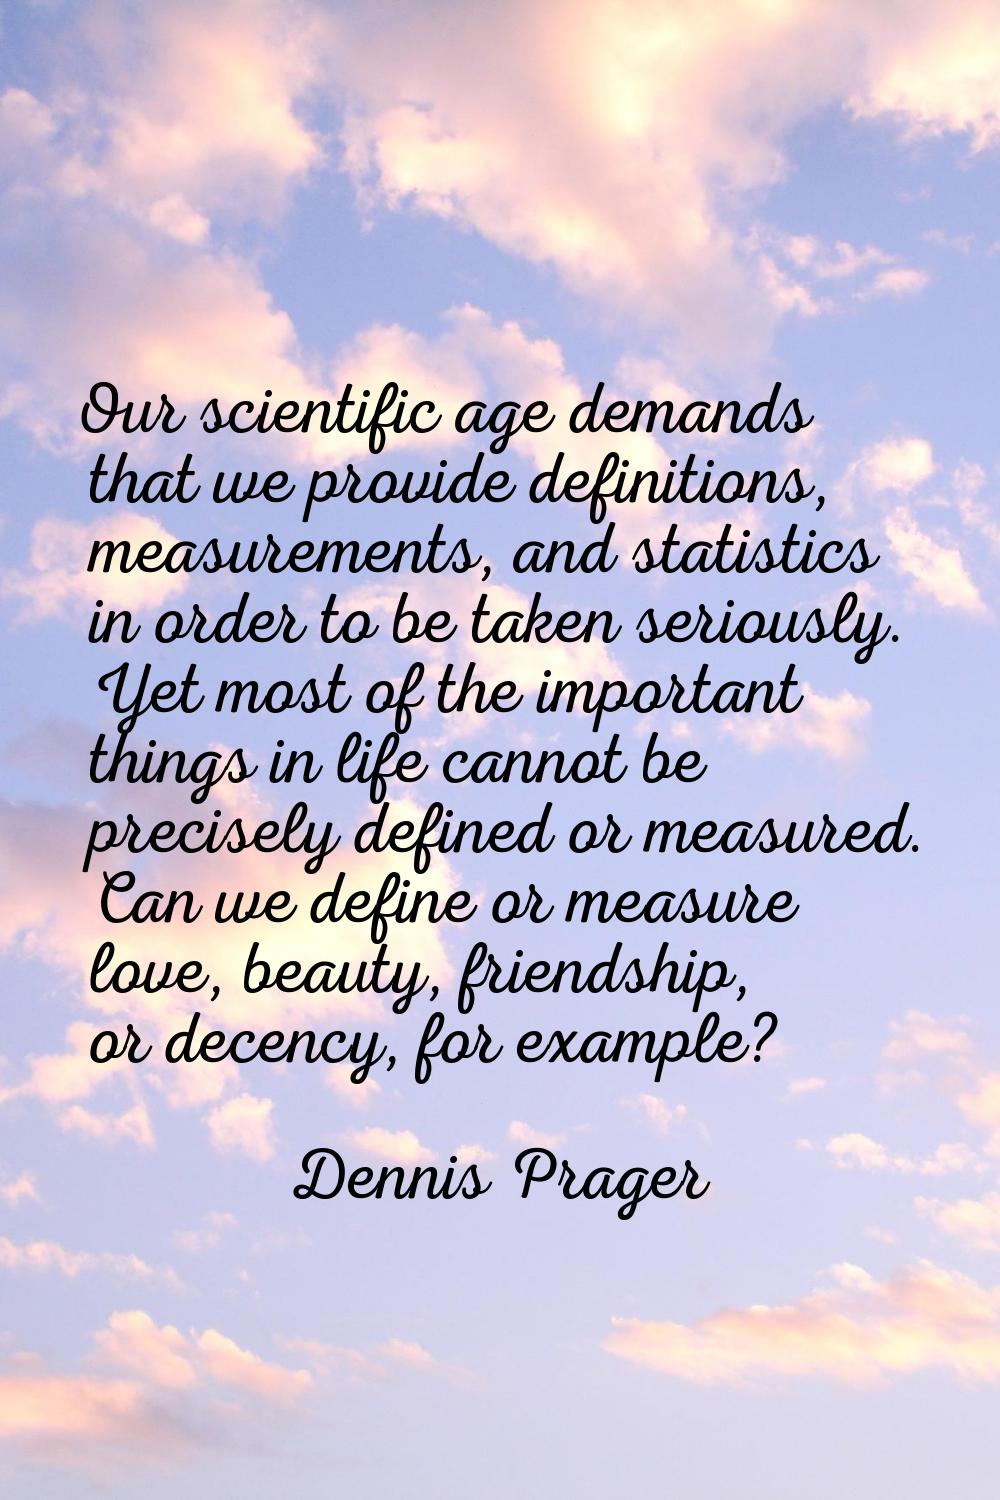 Our scientific age demands that we provide definitions, measurements, and statistics in order to be